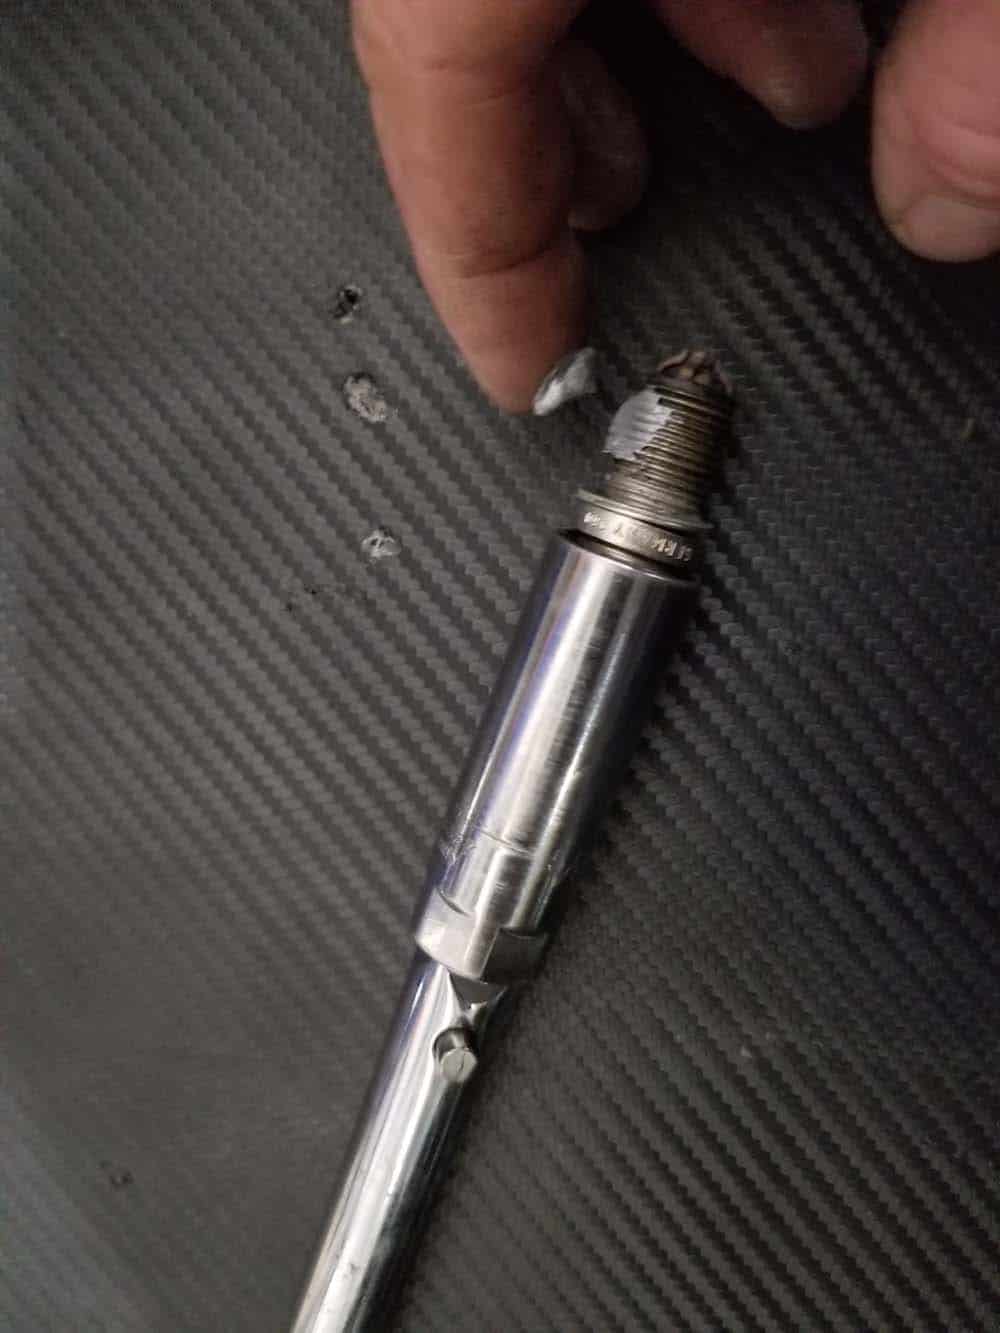 BMW E60 Tune Up - Add a small amount of anti-seize lubricant to the end of the spark plug